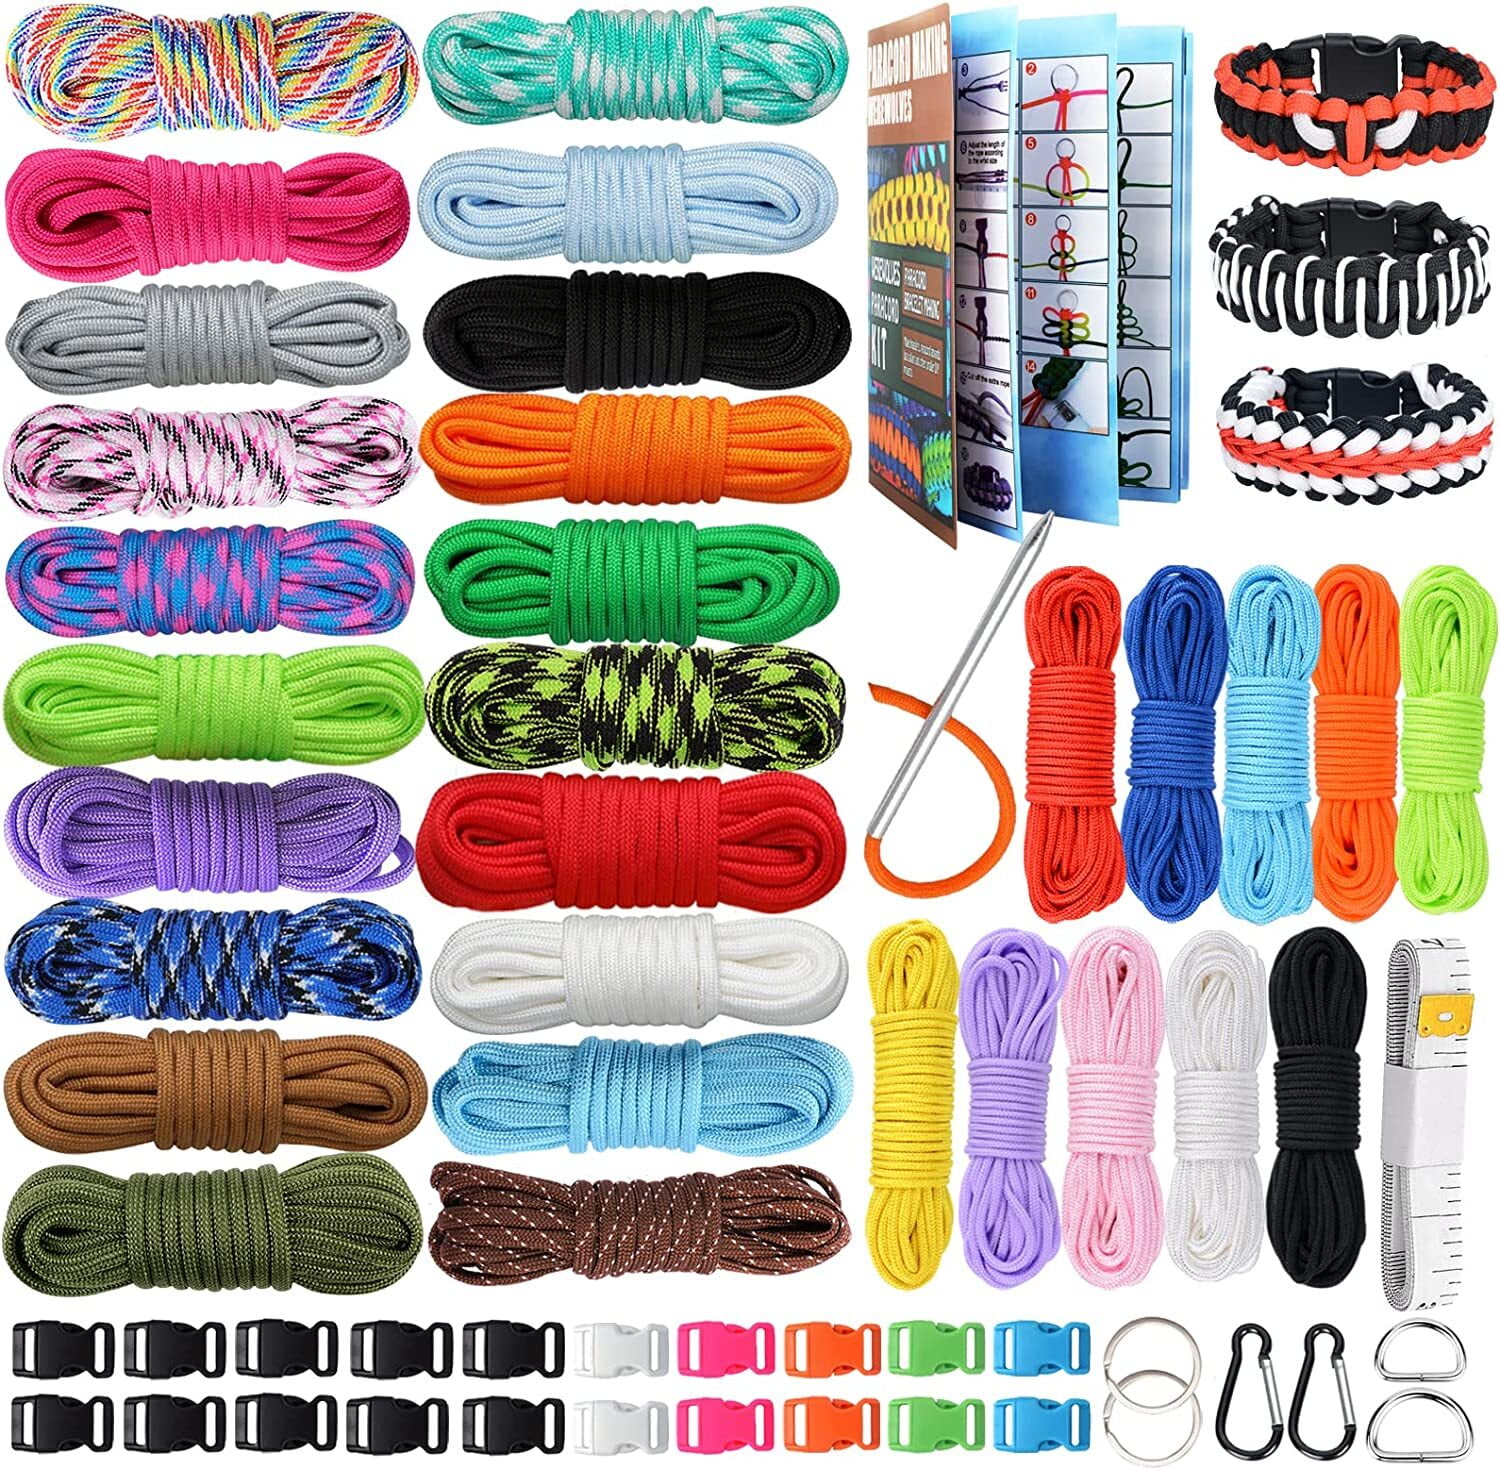 MONOBIN Micro Paracord，2mm 10Colors 20FT Paracord Combo Kit with Paracord  Instructions and Charms ​for Making Paracord Bracelets, Lanyards, Jewelry